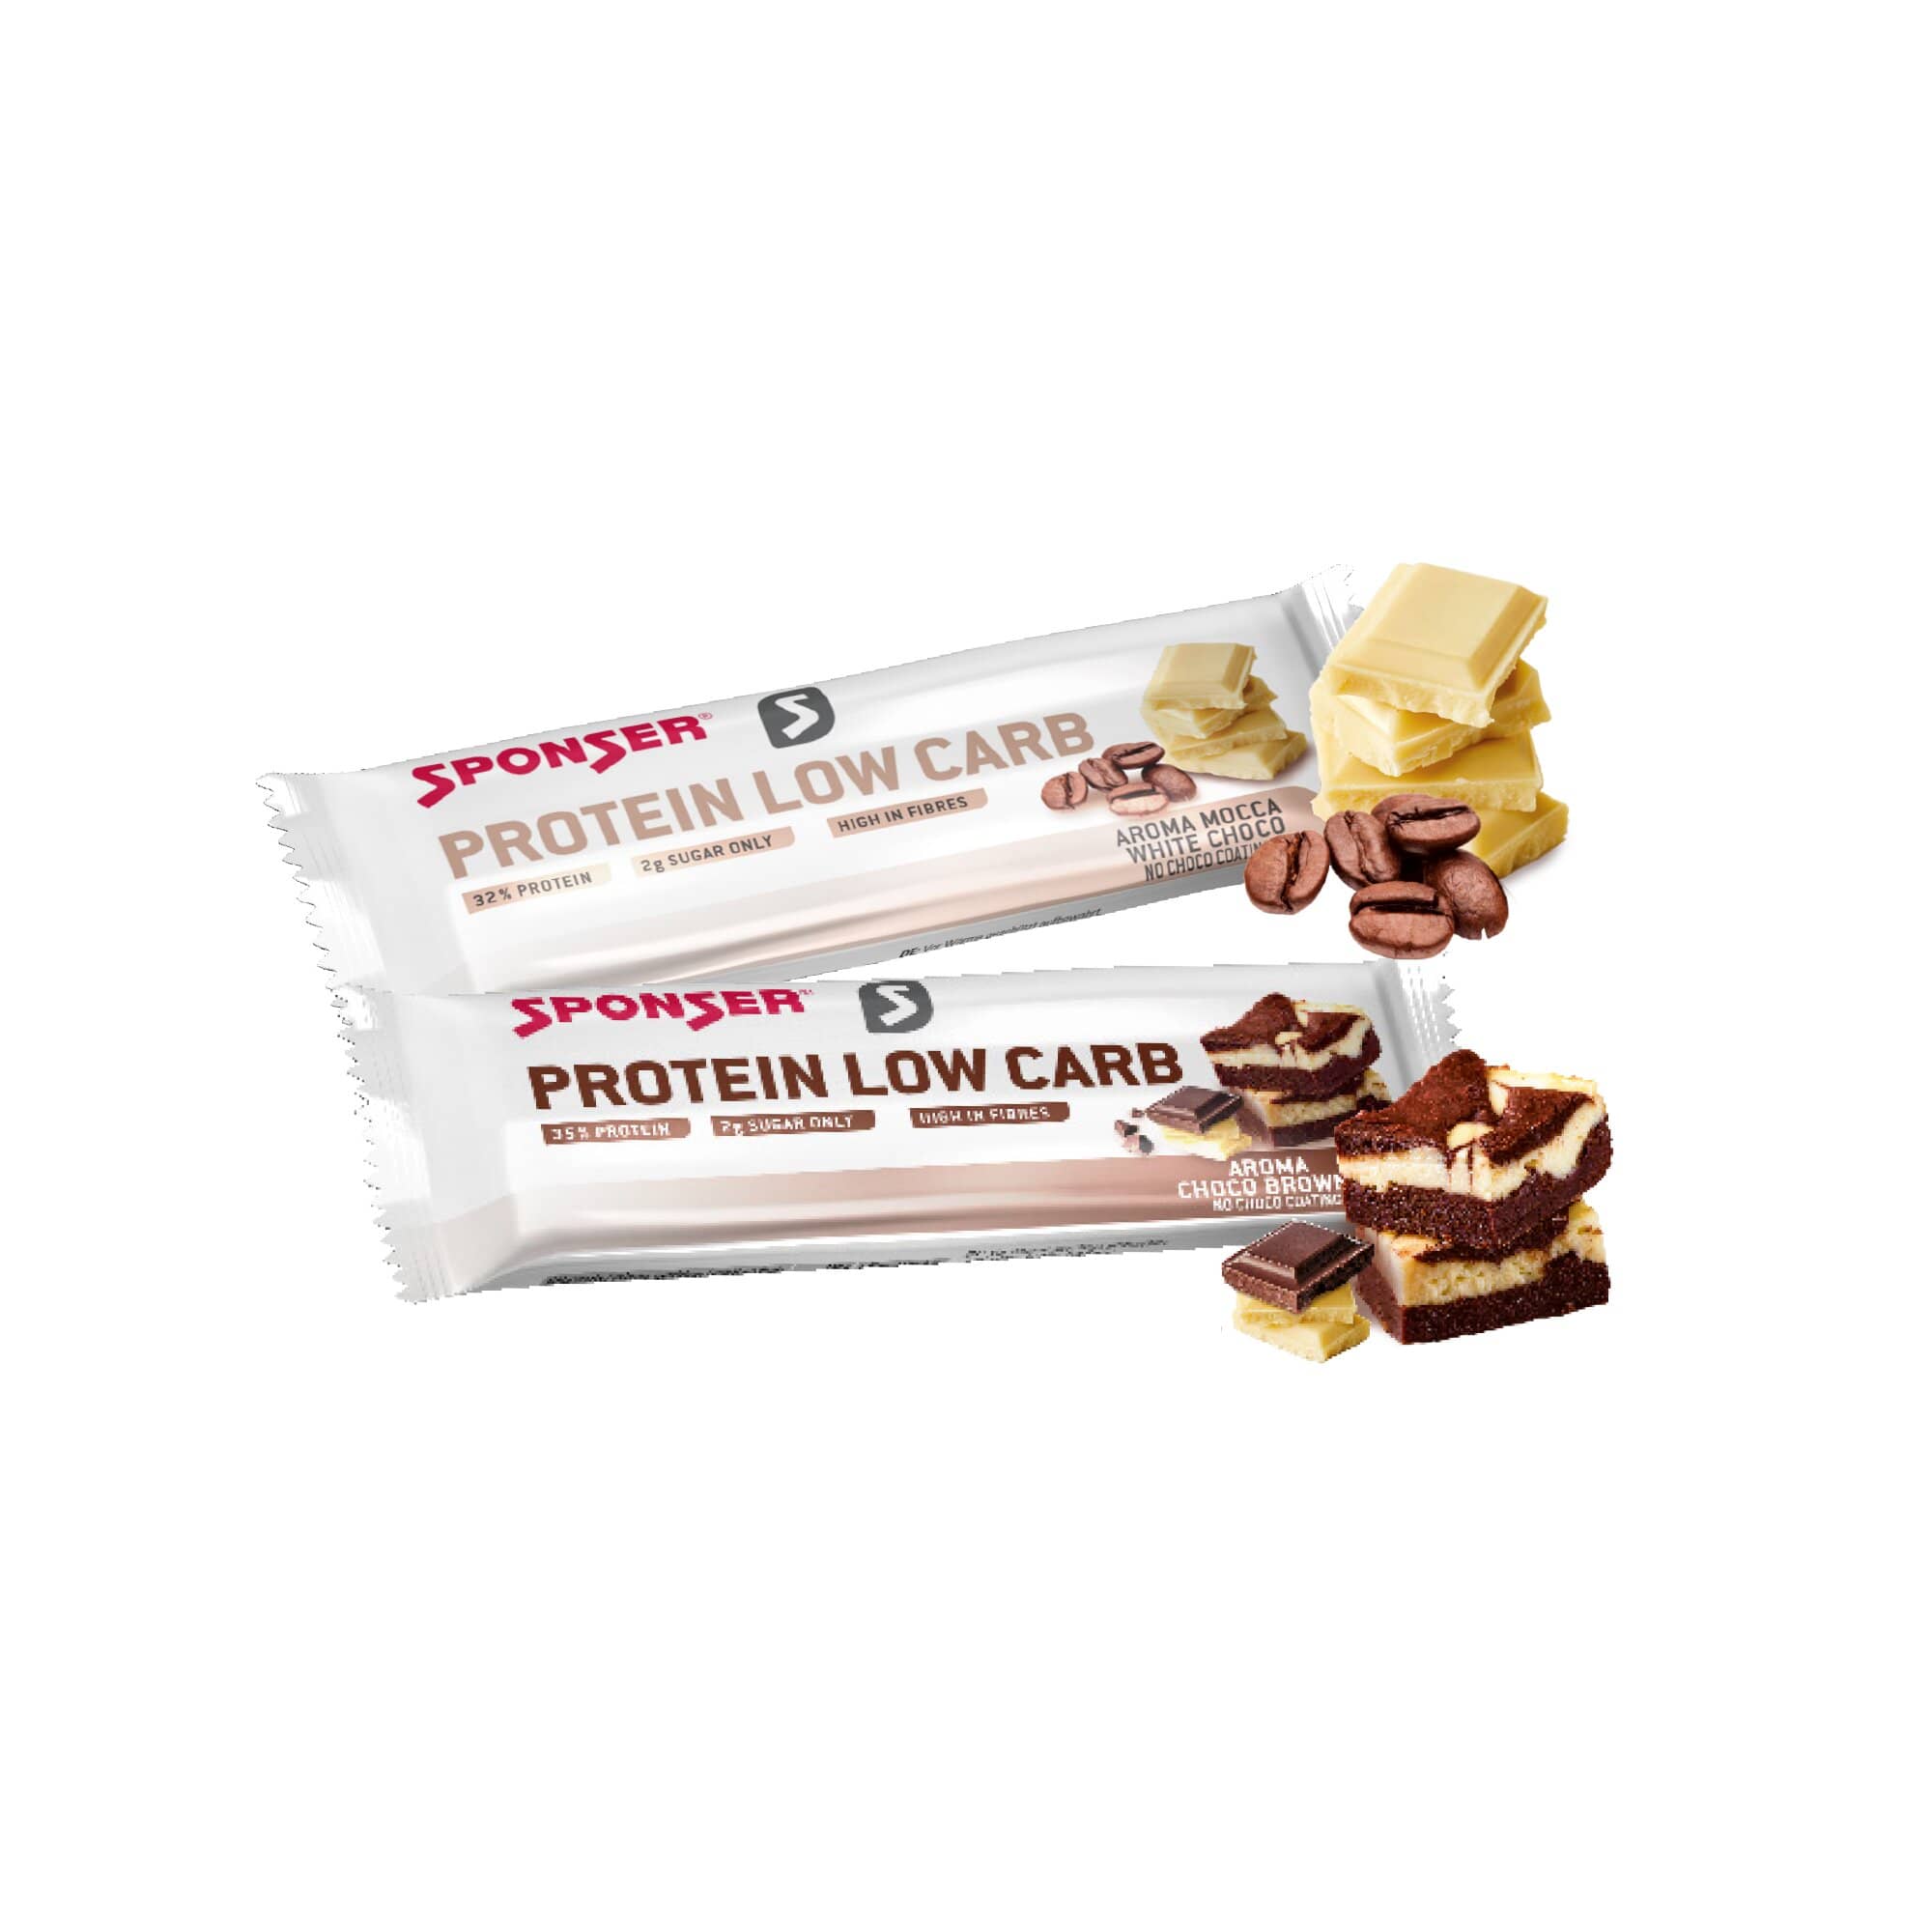 Sponser Protein Low Carb Bar (50g)